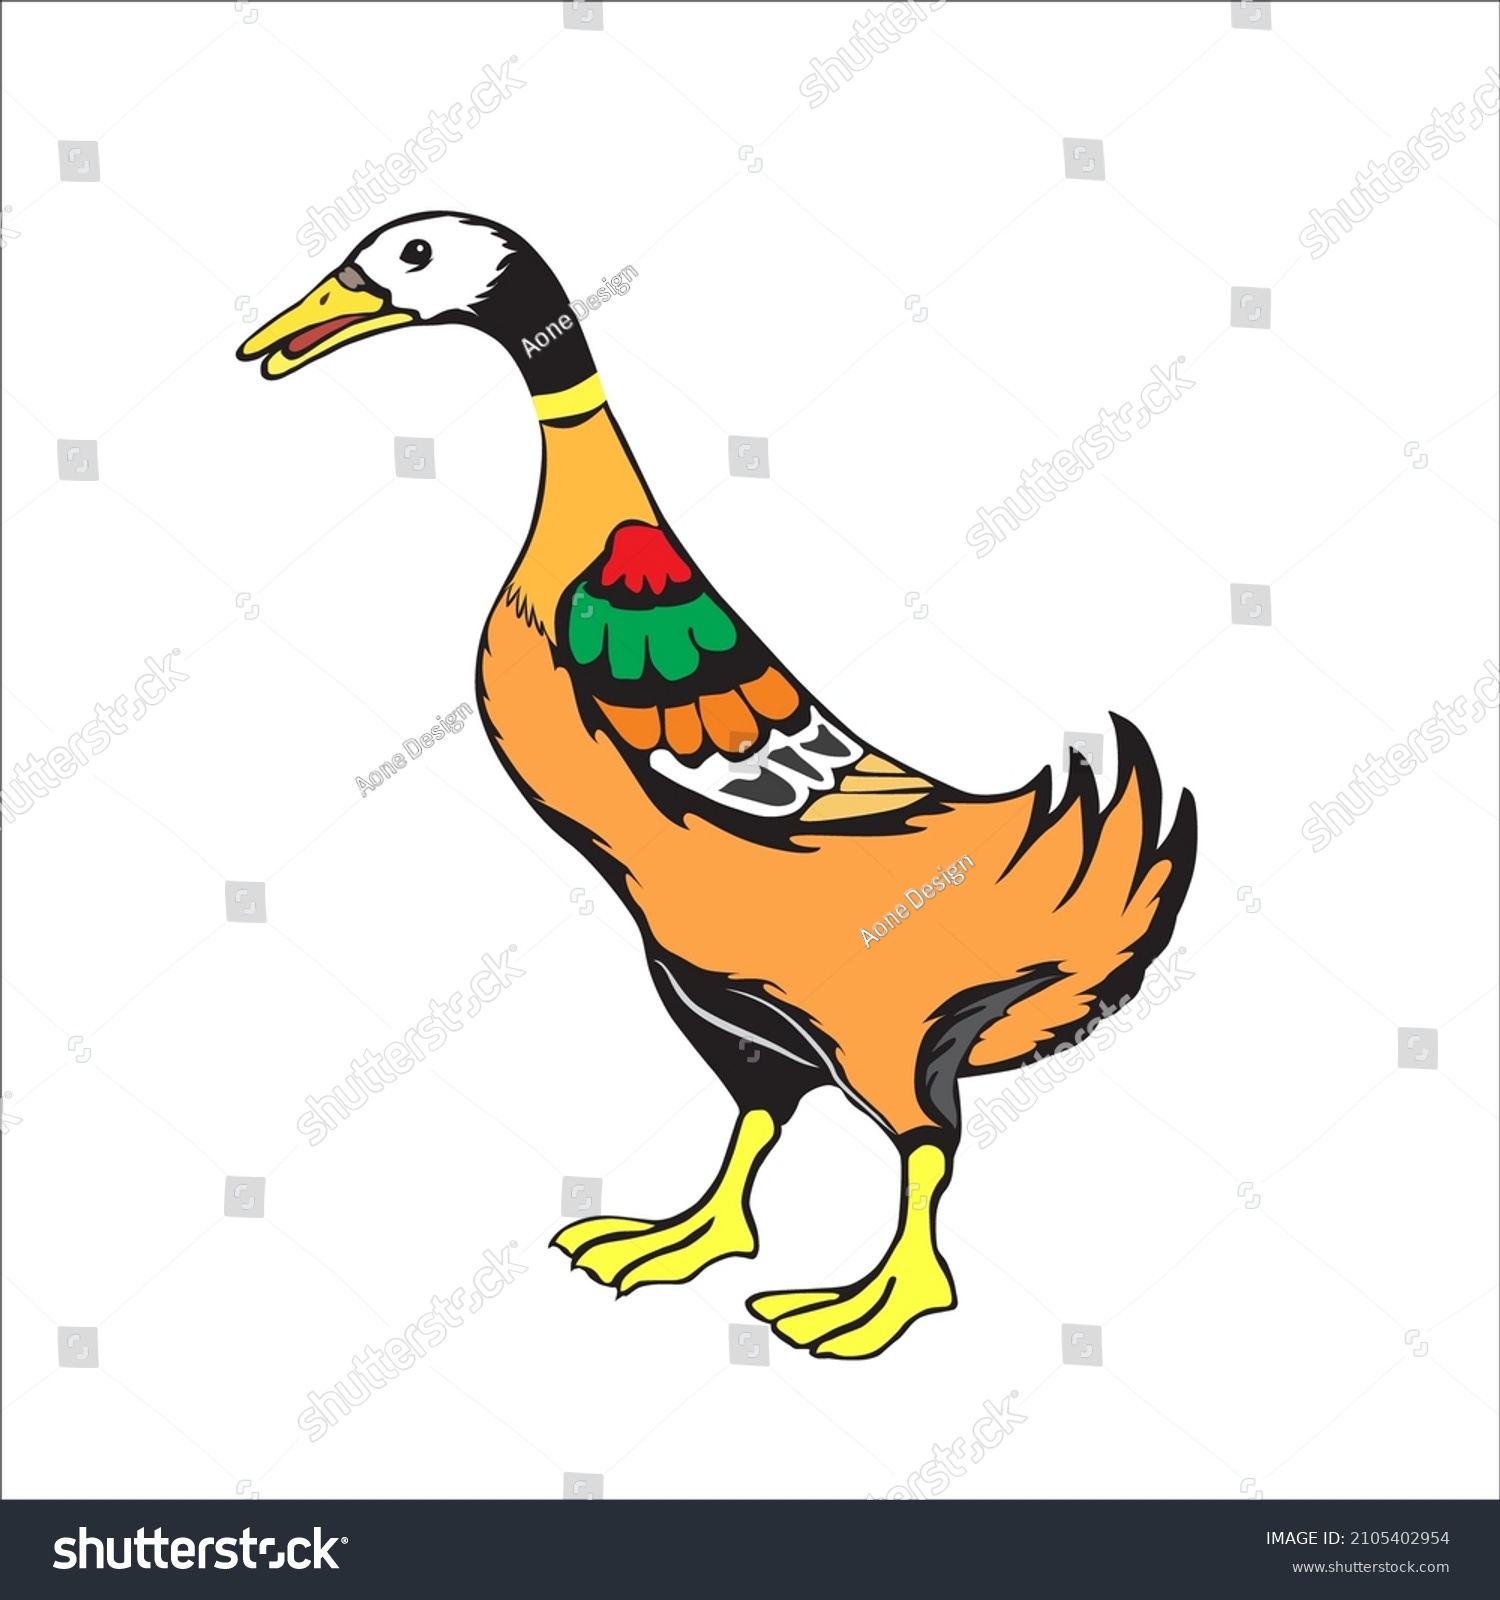 SVG of Indian Runner duck in cartoon style. Vector illustration on a white background.
duck svg